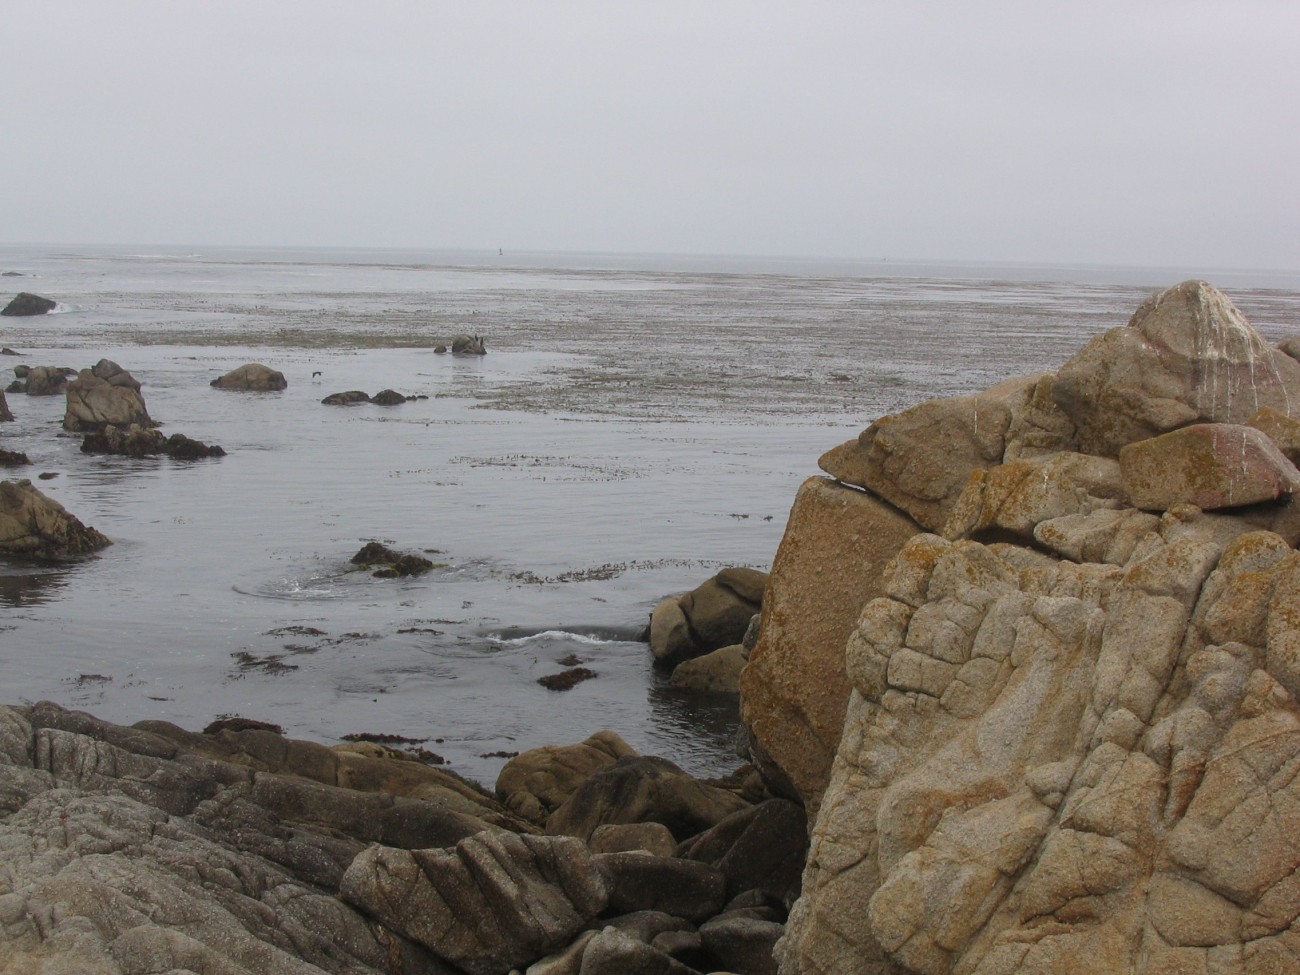 The granodiorite rocky shore and the kelp forests of the Pacific Grove areaof Monterey Bay